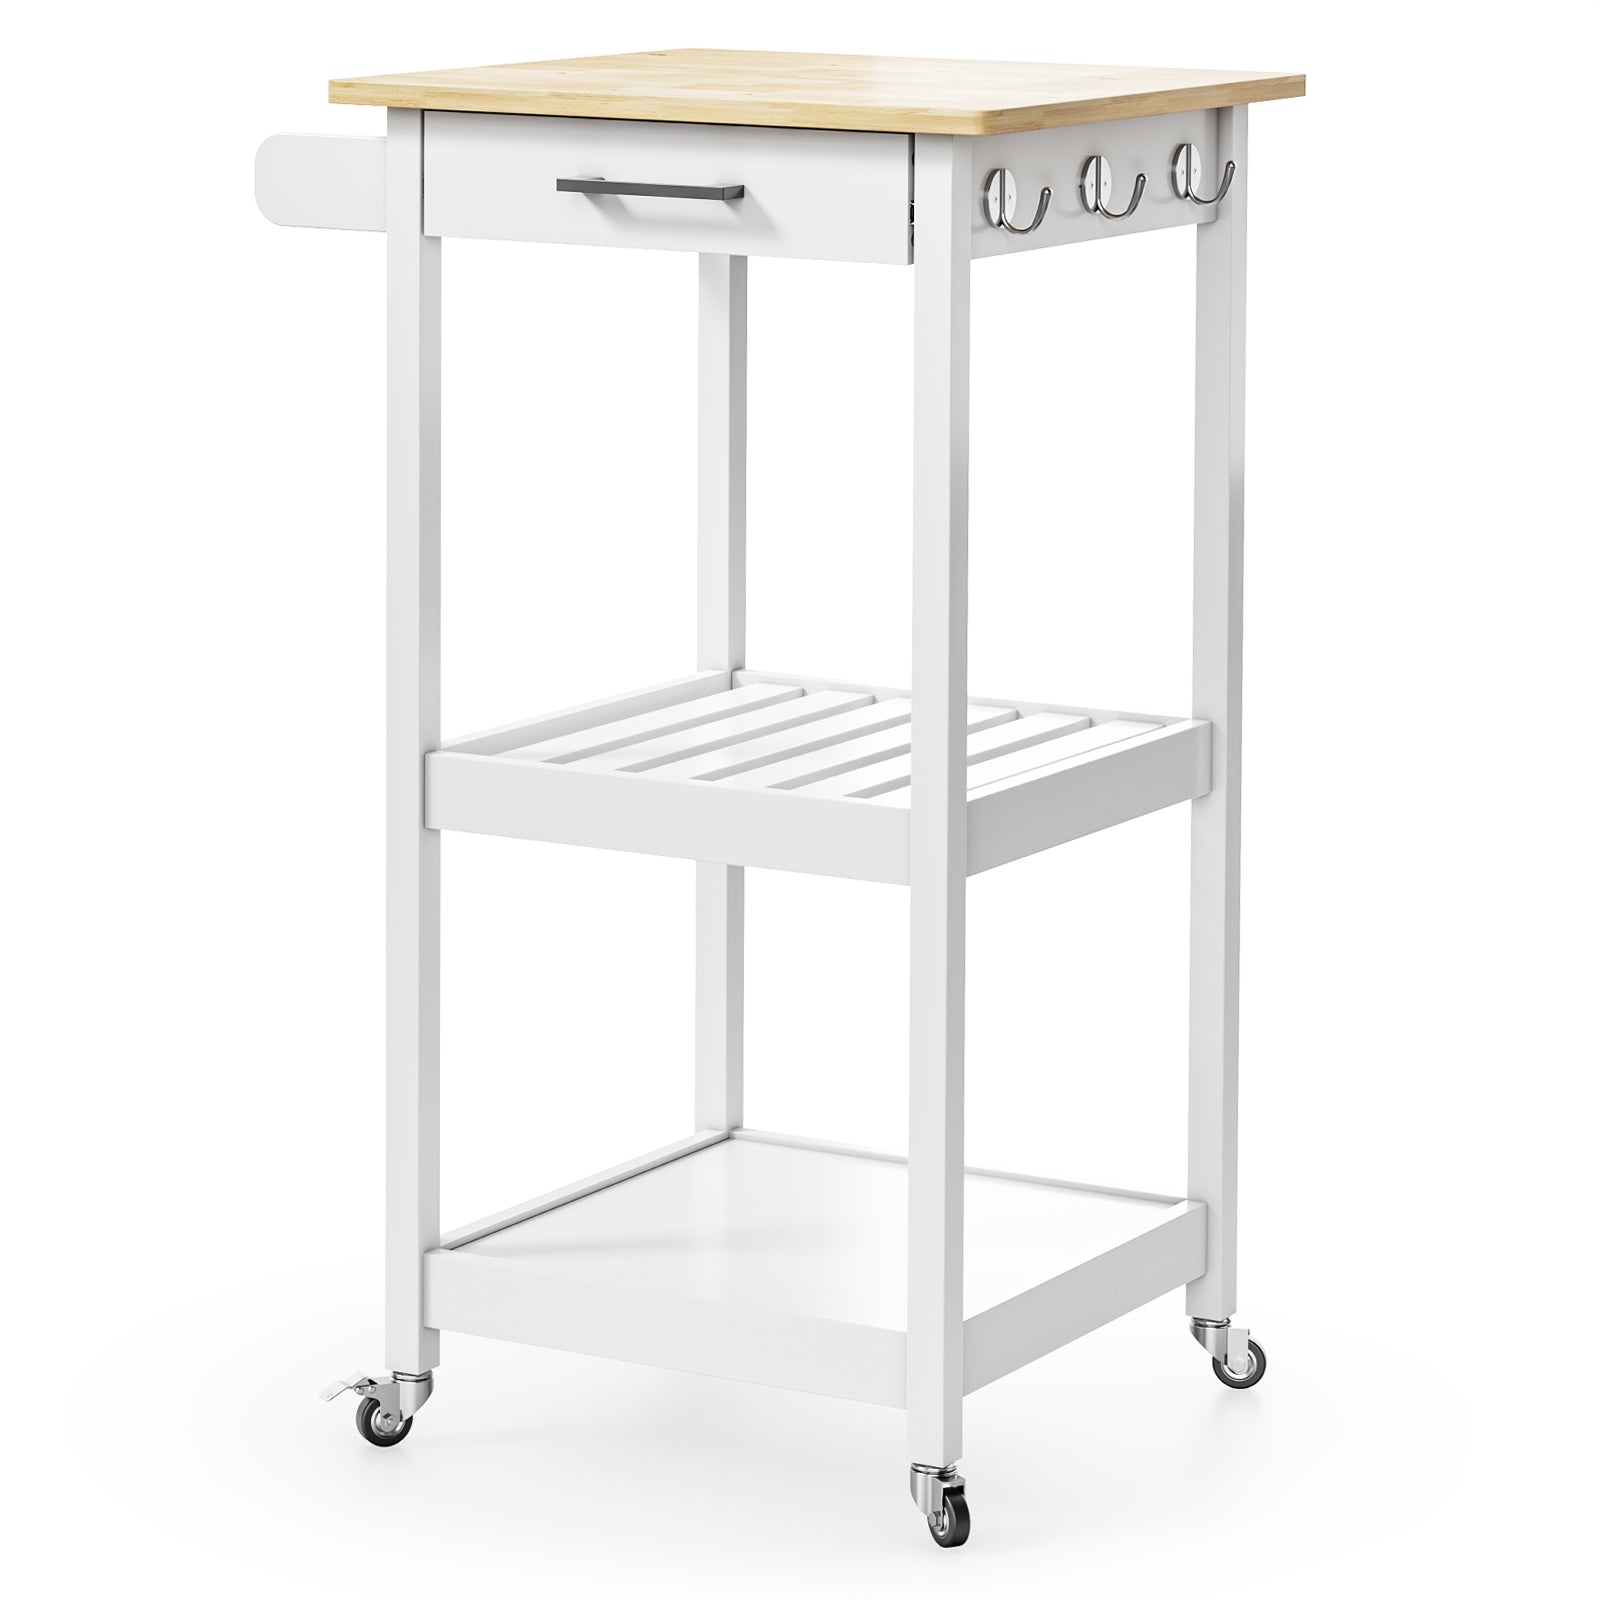 Gizoon KC30 Rolling Small Kitchen Island Cart with Top Drawer and 2 Open Shelf